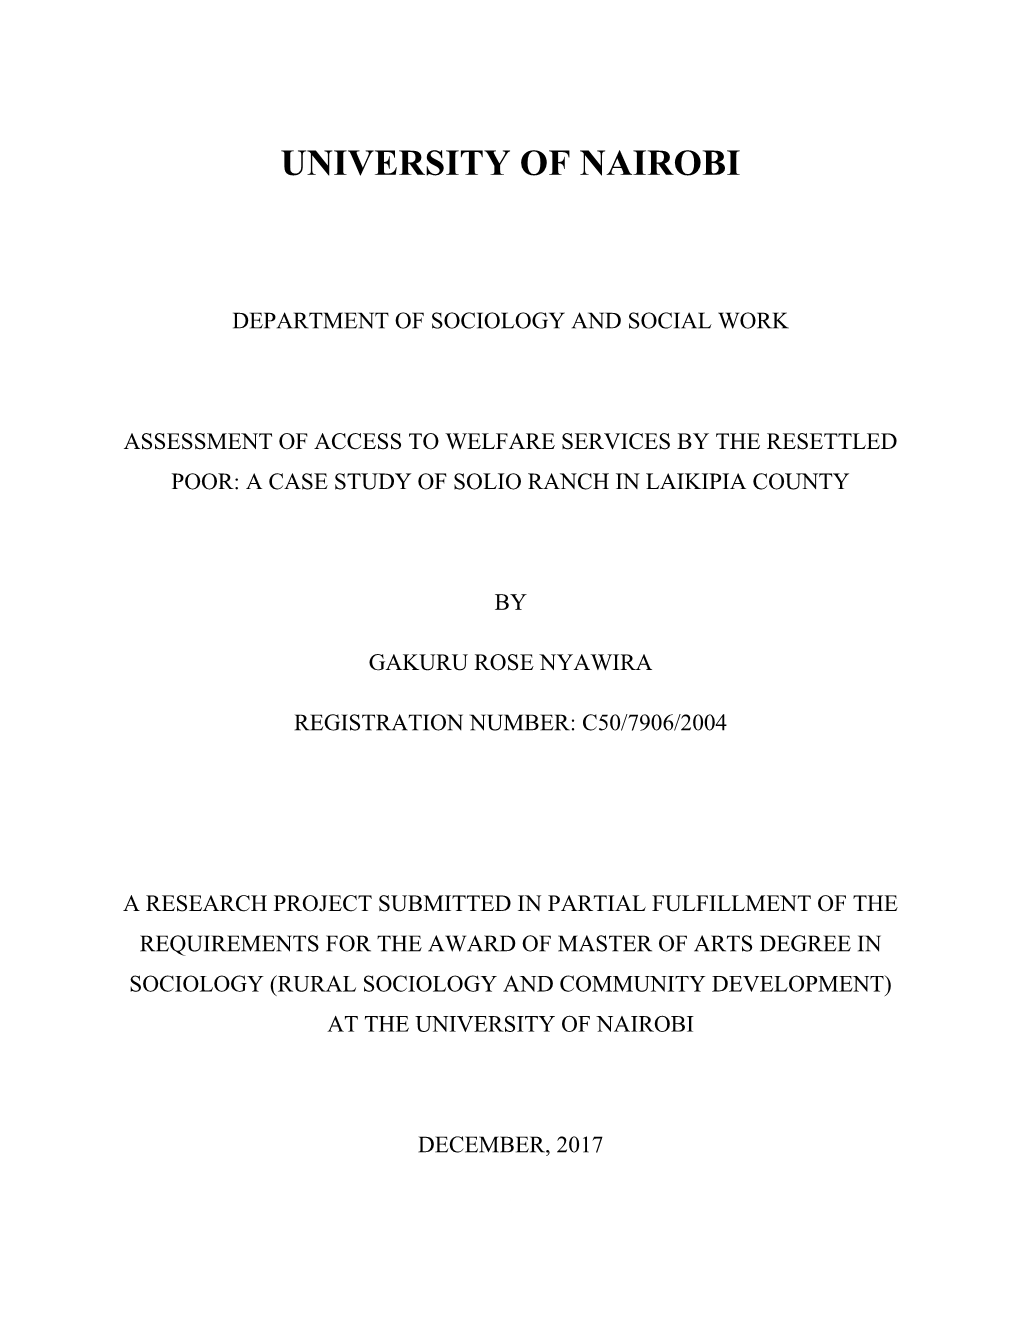 A Case Study of Solio Ranch in Laikipia County